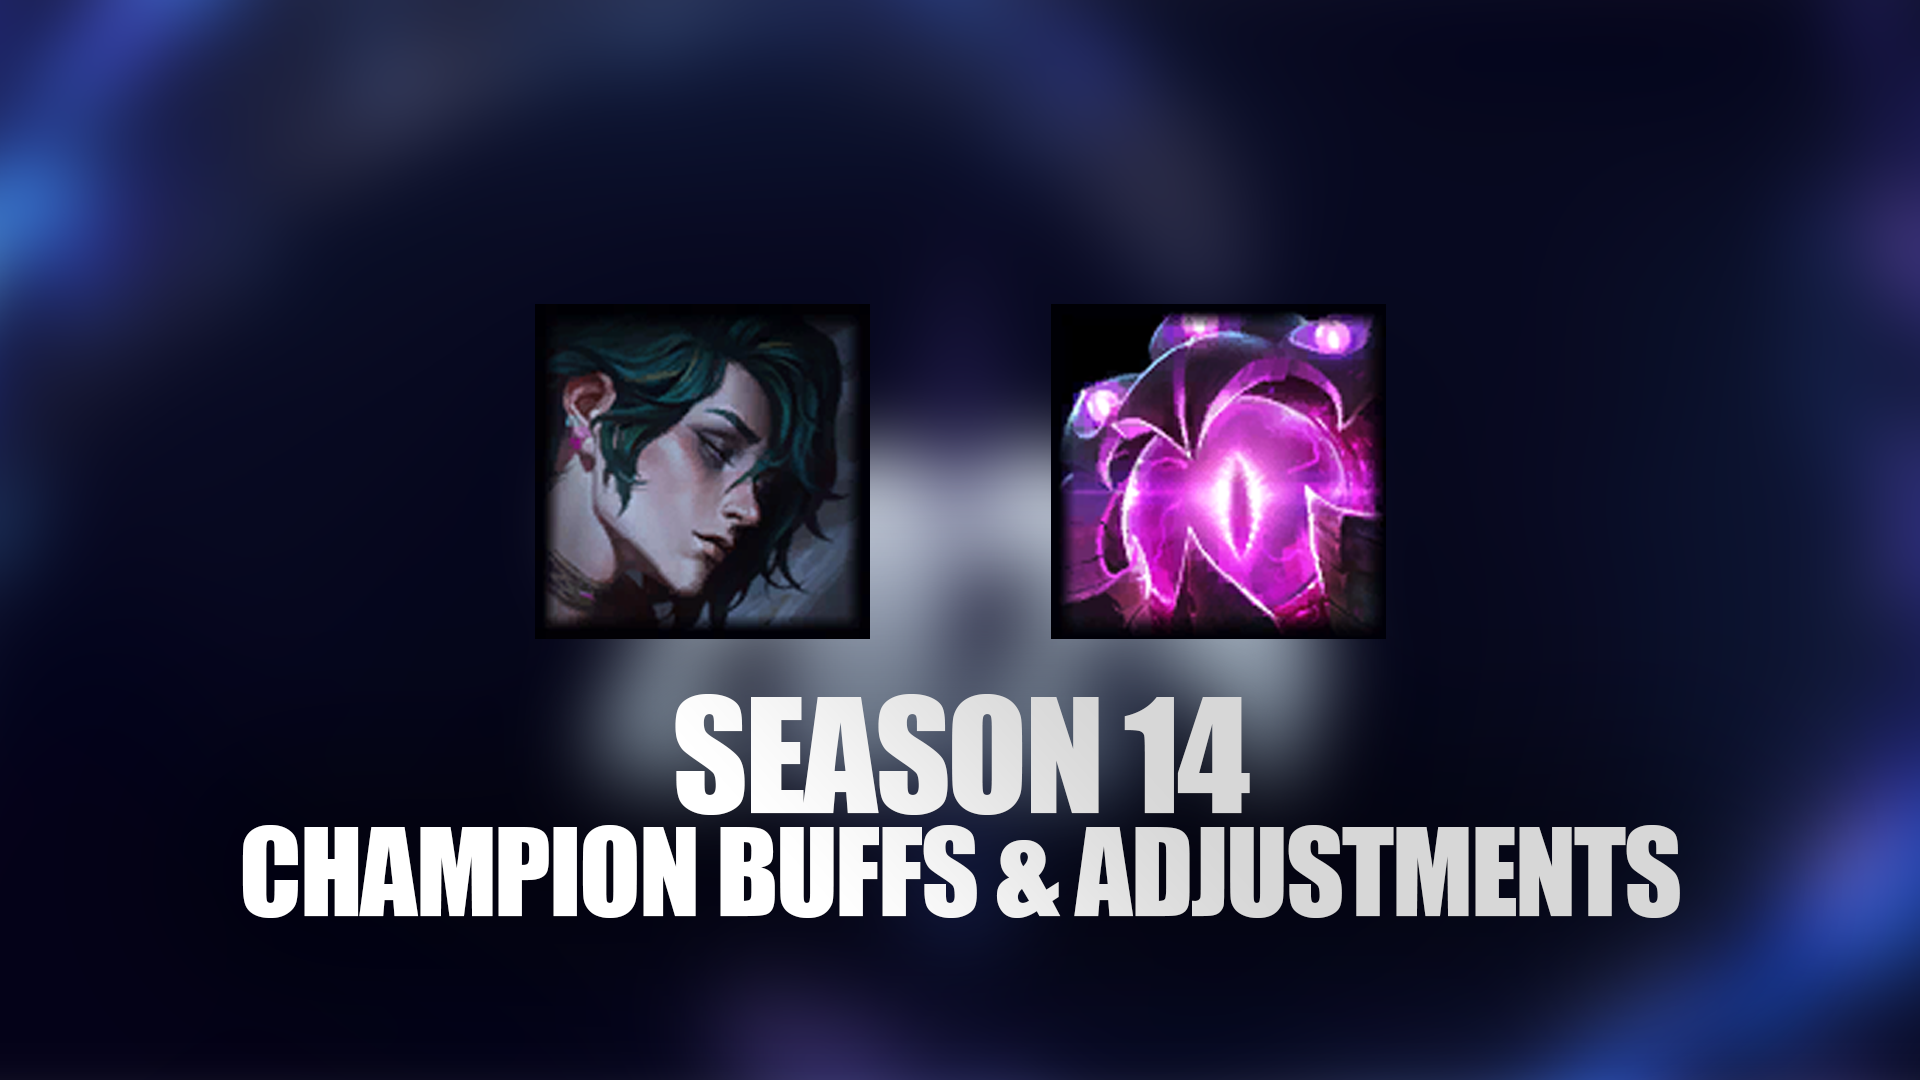 While the systems updates take center stage, patch 14.1 also contains some key adjustments to specific champions. Rather than tons of individual nerfs and buffs, this patch focuses on modernizing older champions to fit better into the evolving meta.